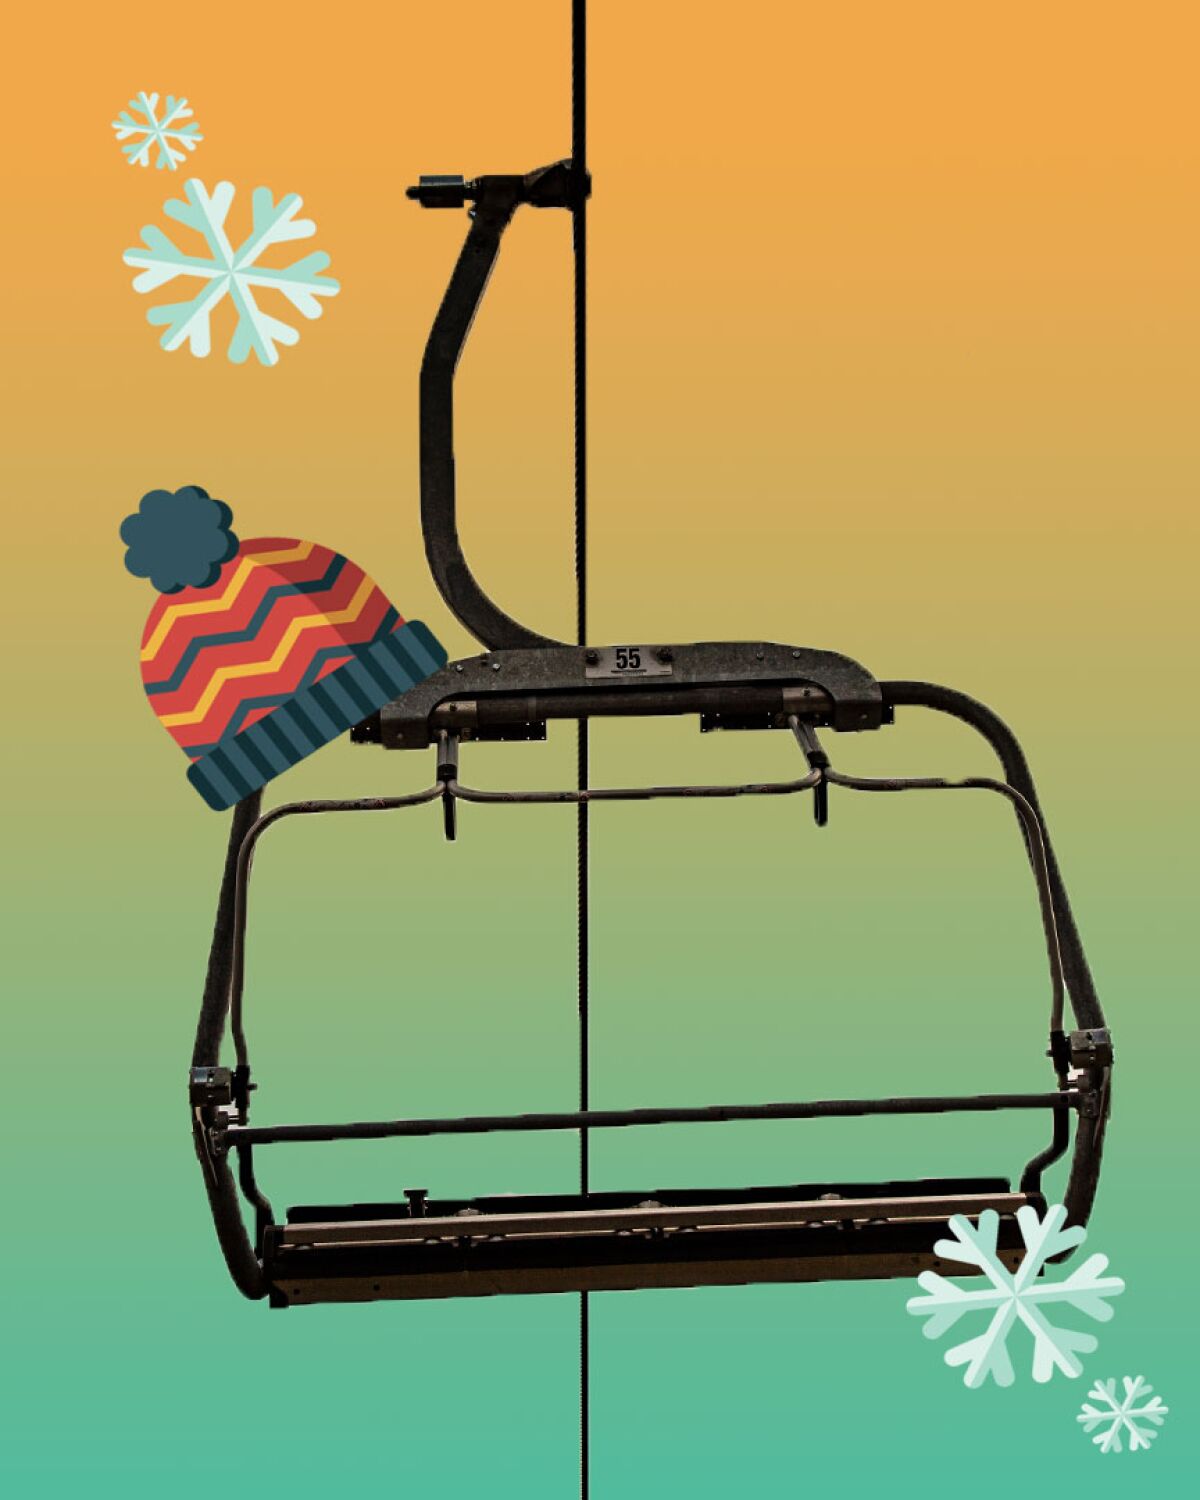 Ski lift with illustrated beanie hat and snowflakes.